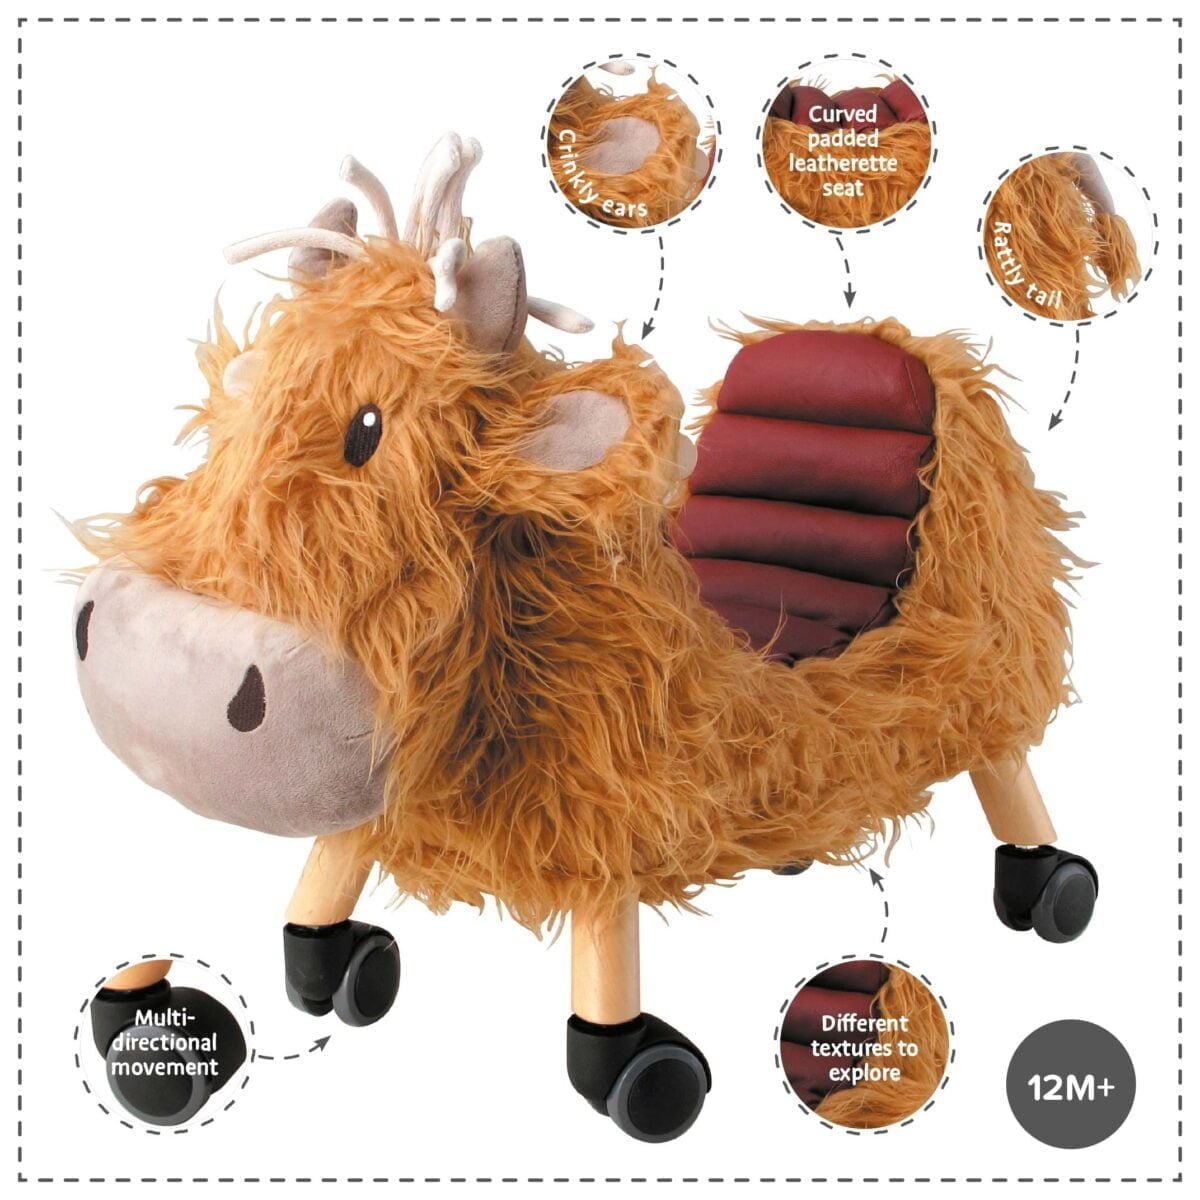 Features and benefits displayed for Hubert Highland Cow Ride On Toy